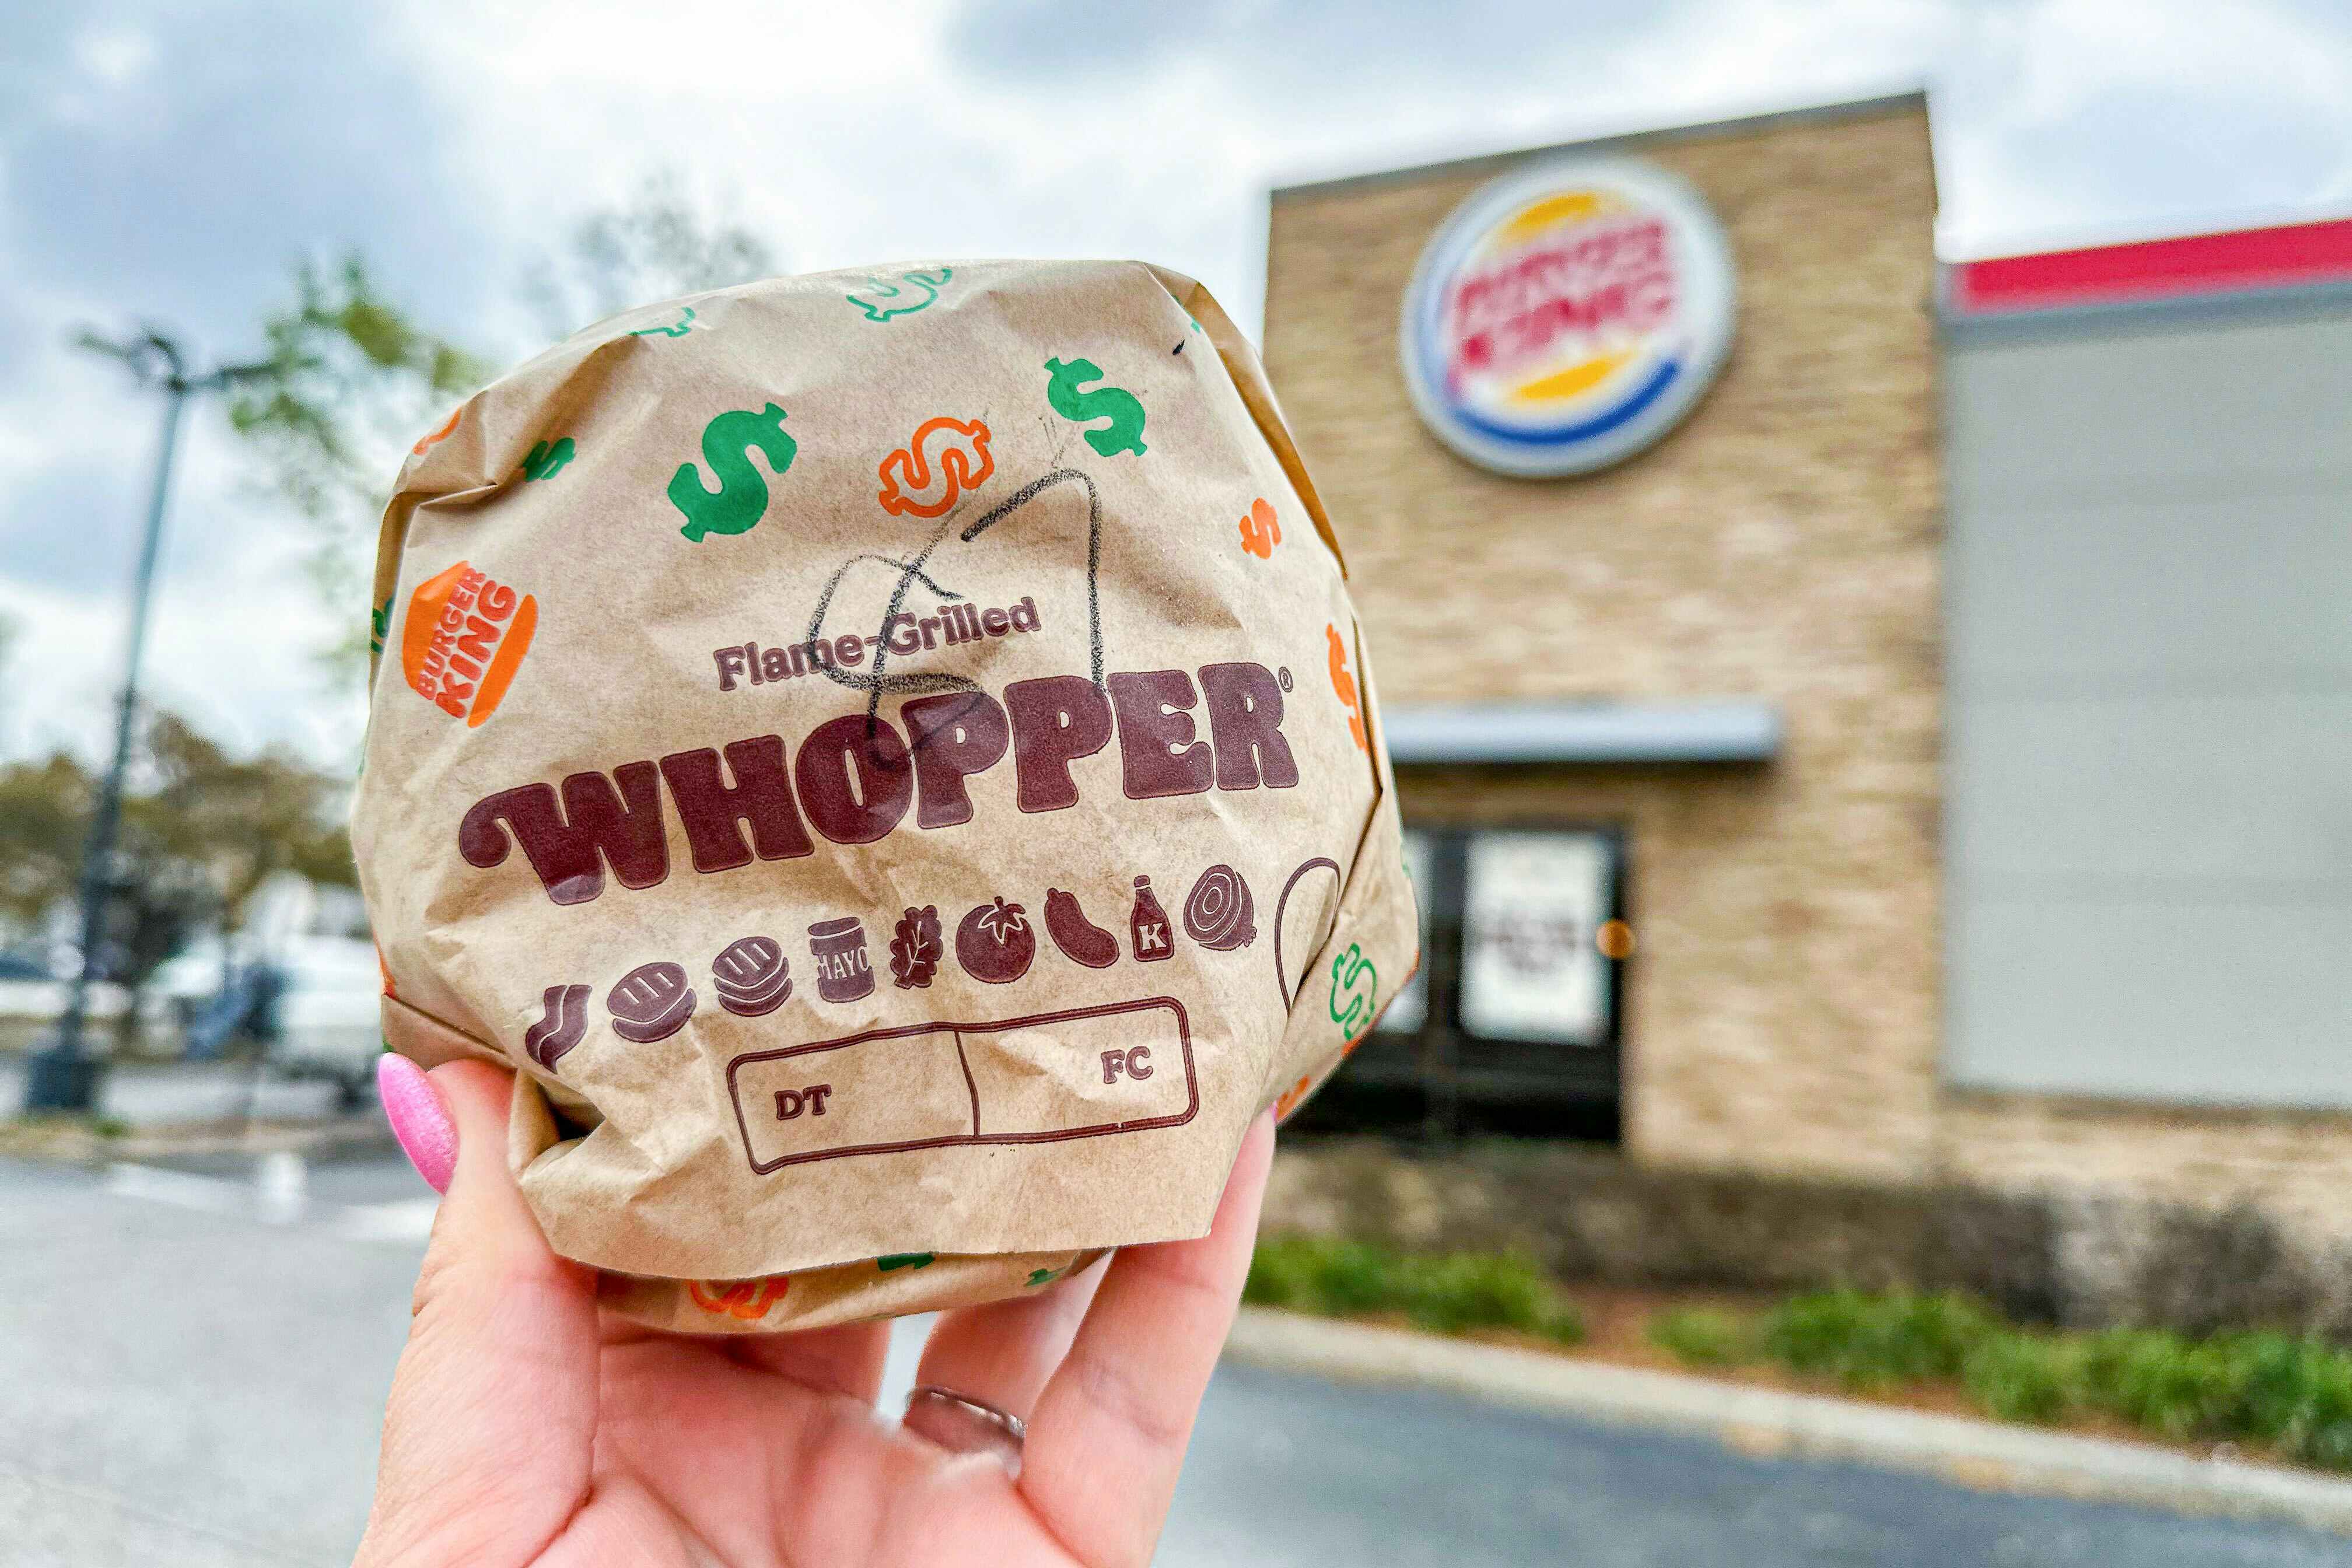 BK Has FREE Whoppers Through March 1 as Wendy's Backtracks on "Surge Pricing"